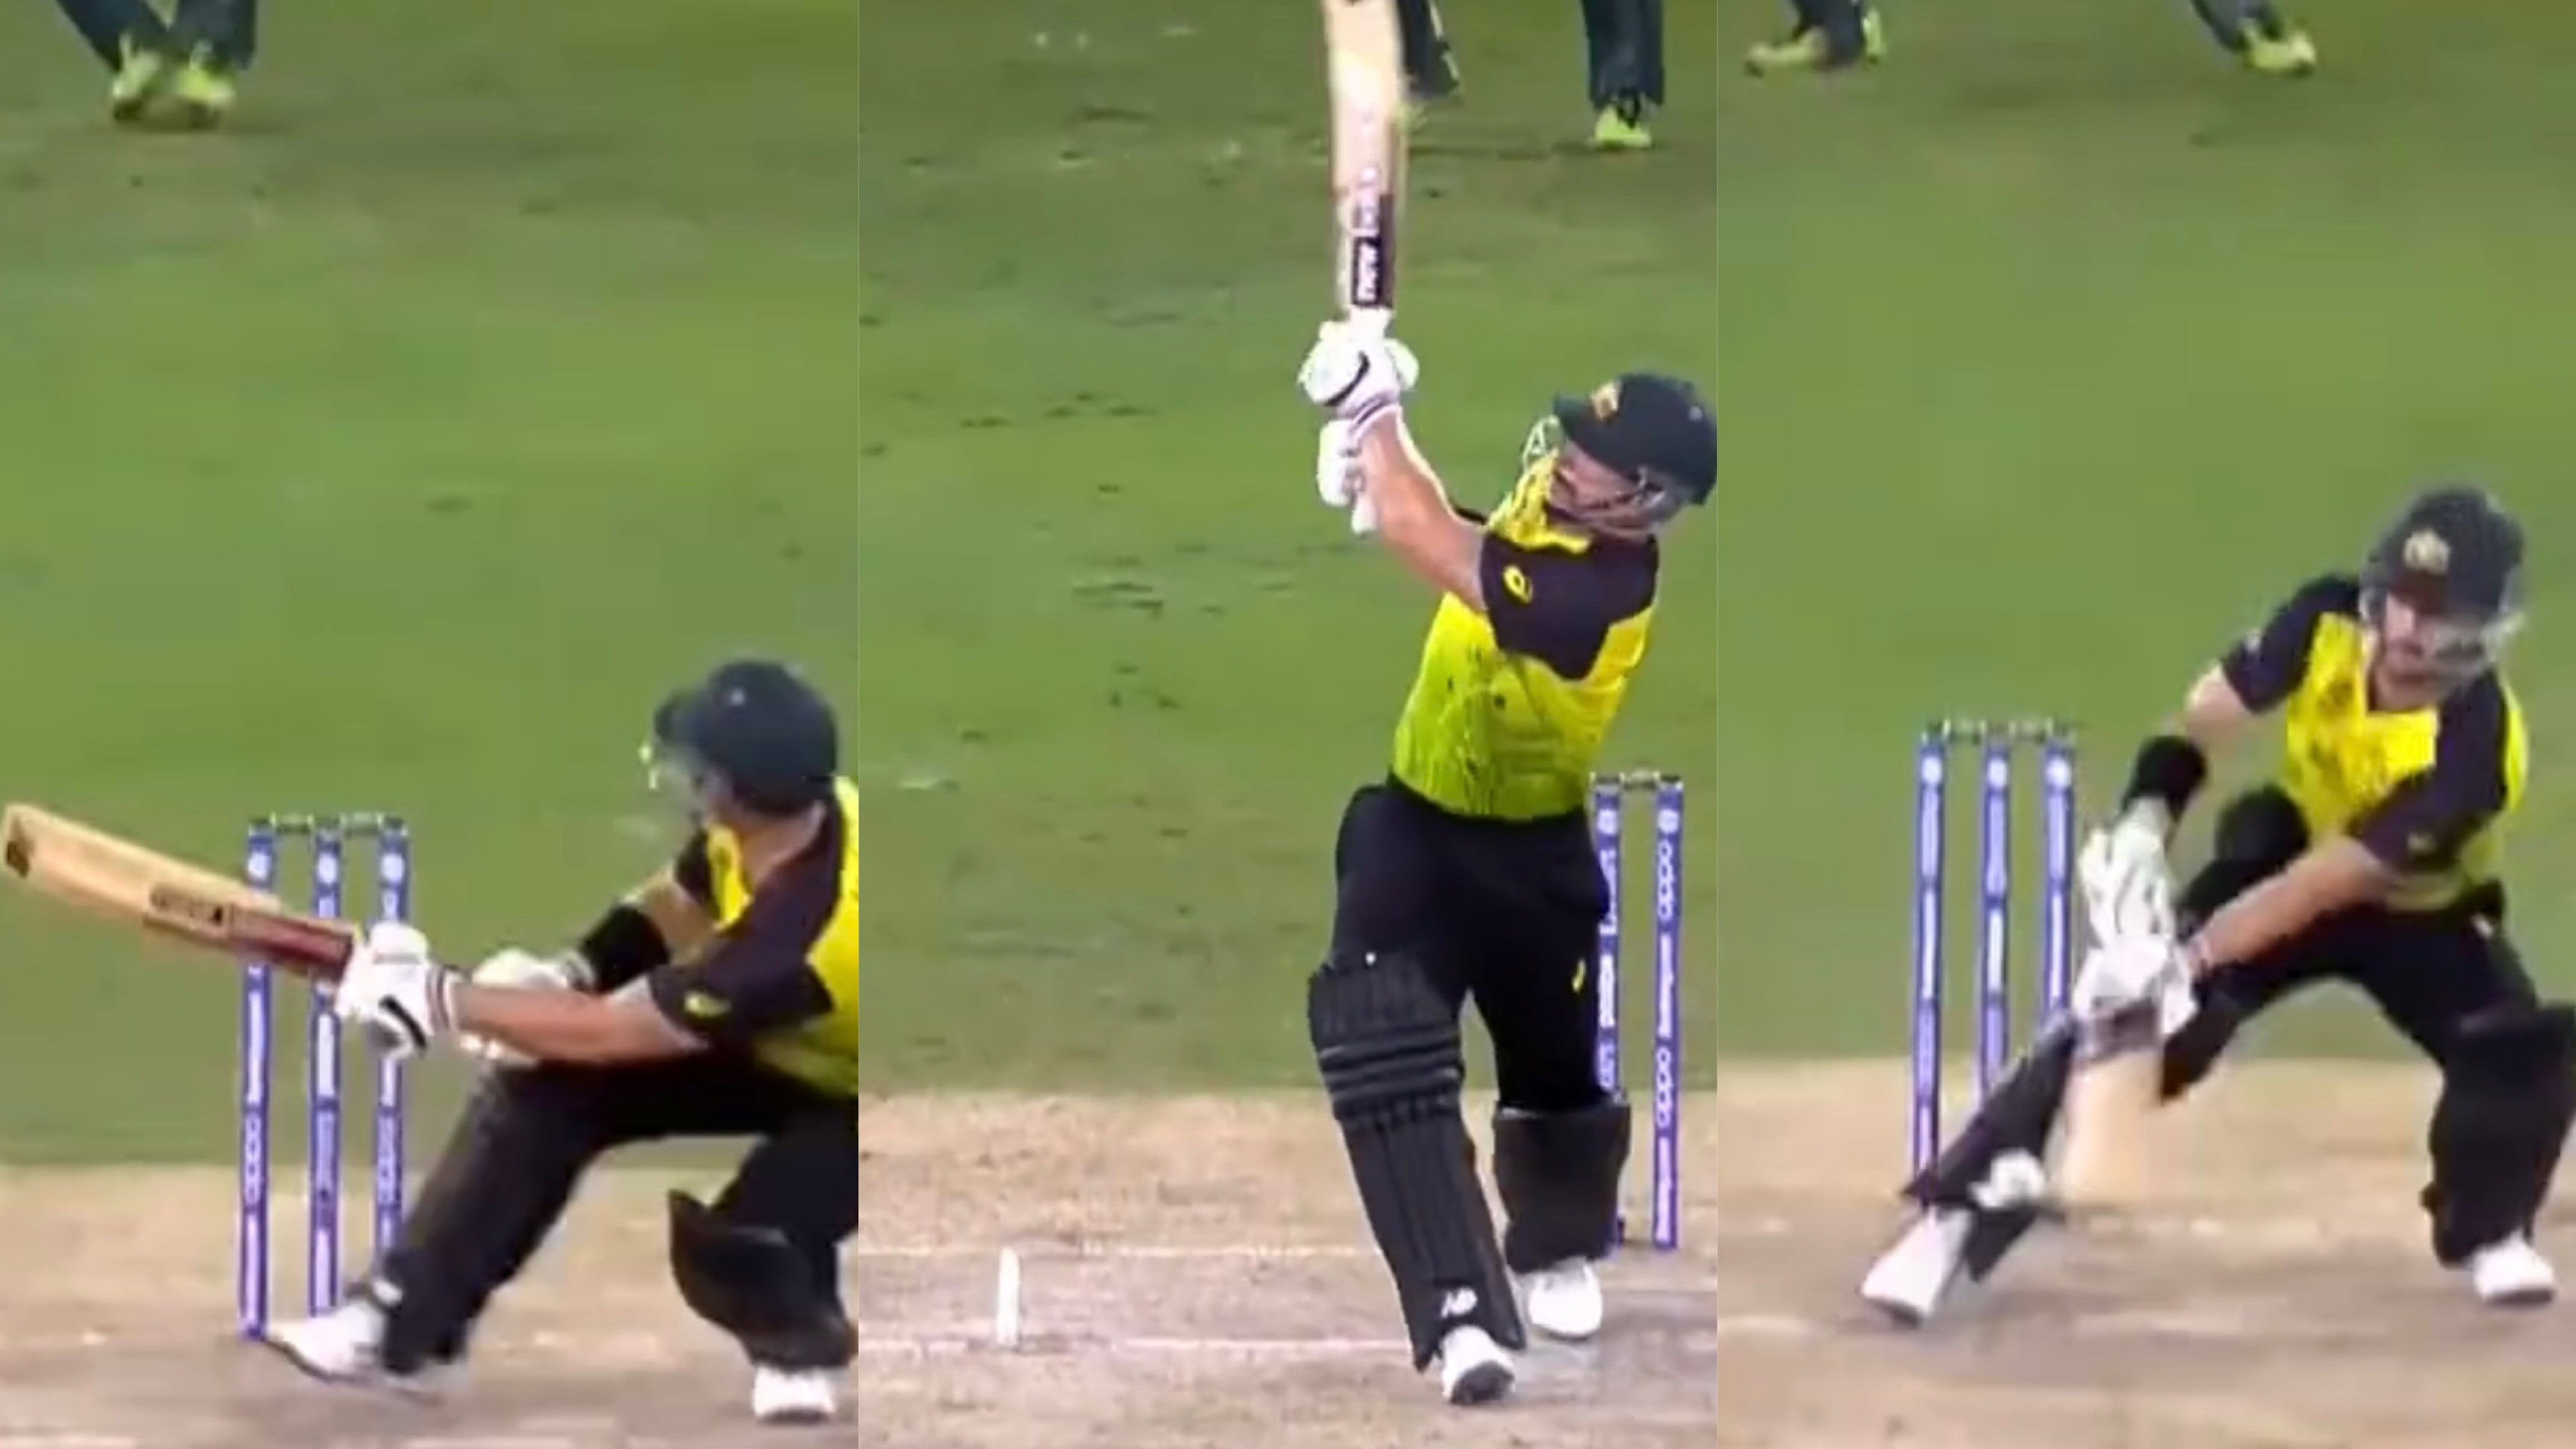 T20 World Cup 2021: WATCH - Matthew Wade hits three consecutive sixes off Shaheen Afridi to knock Pakistan out